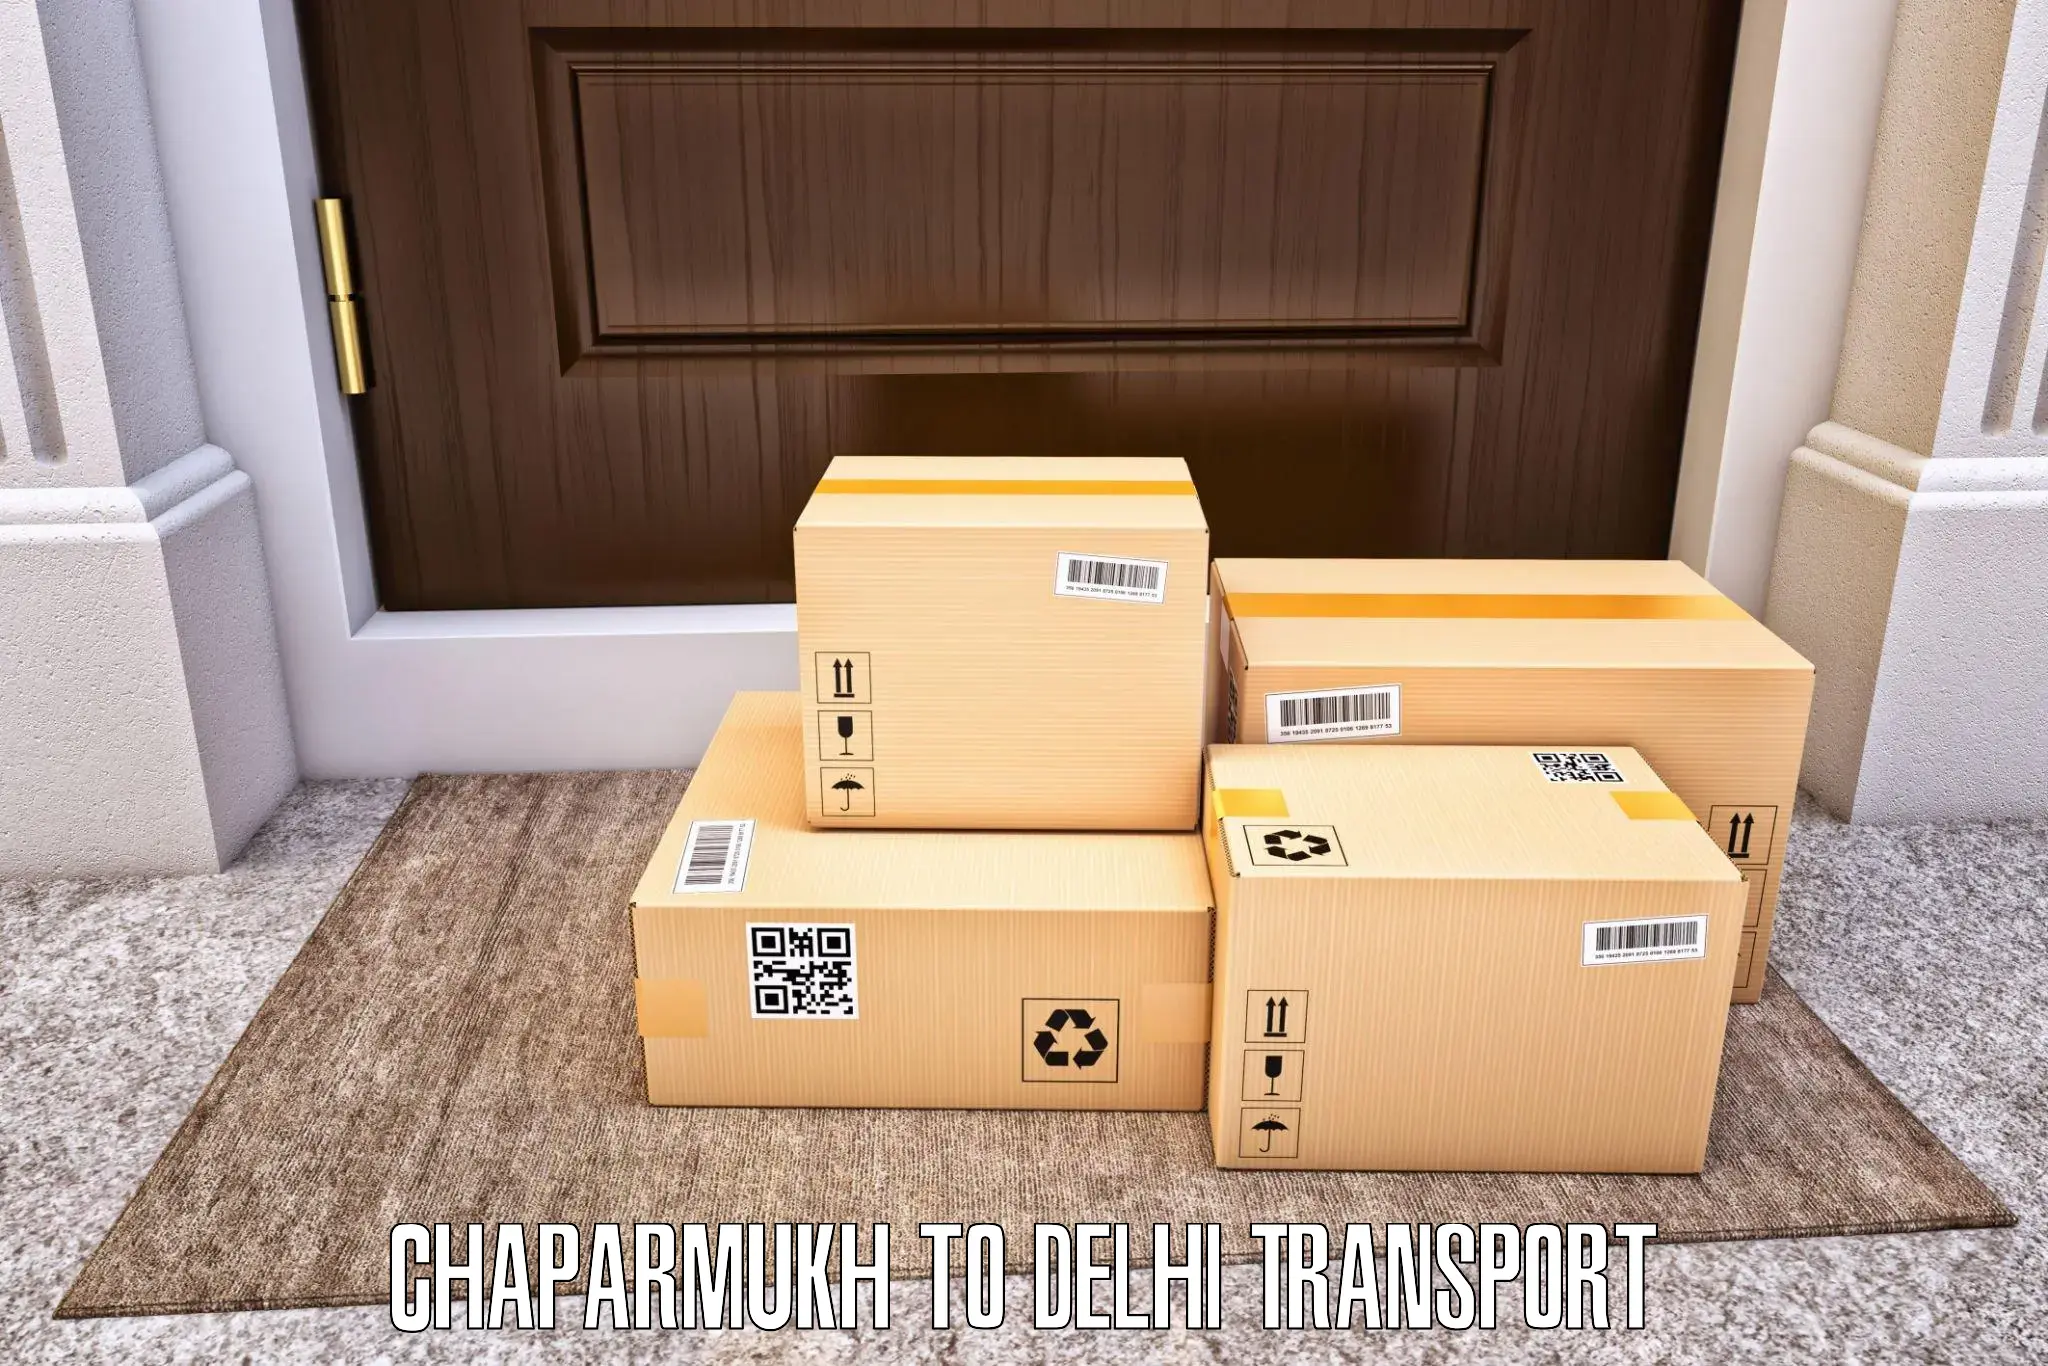 Container transport service Chaparmukh to University of Delhi